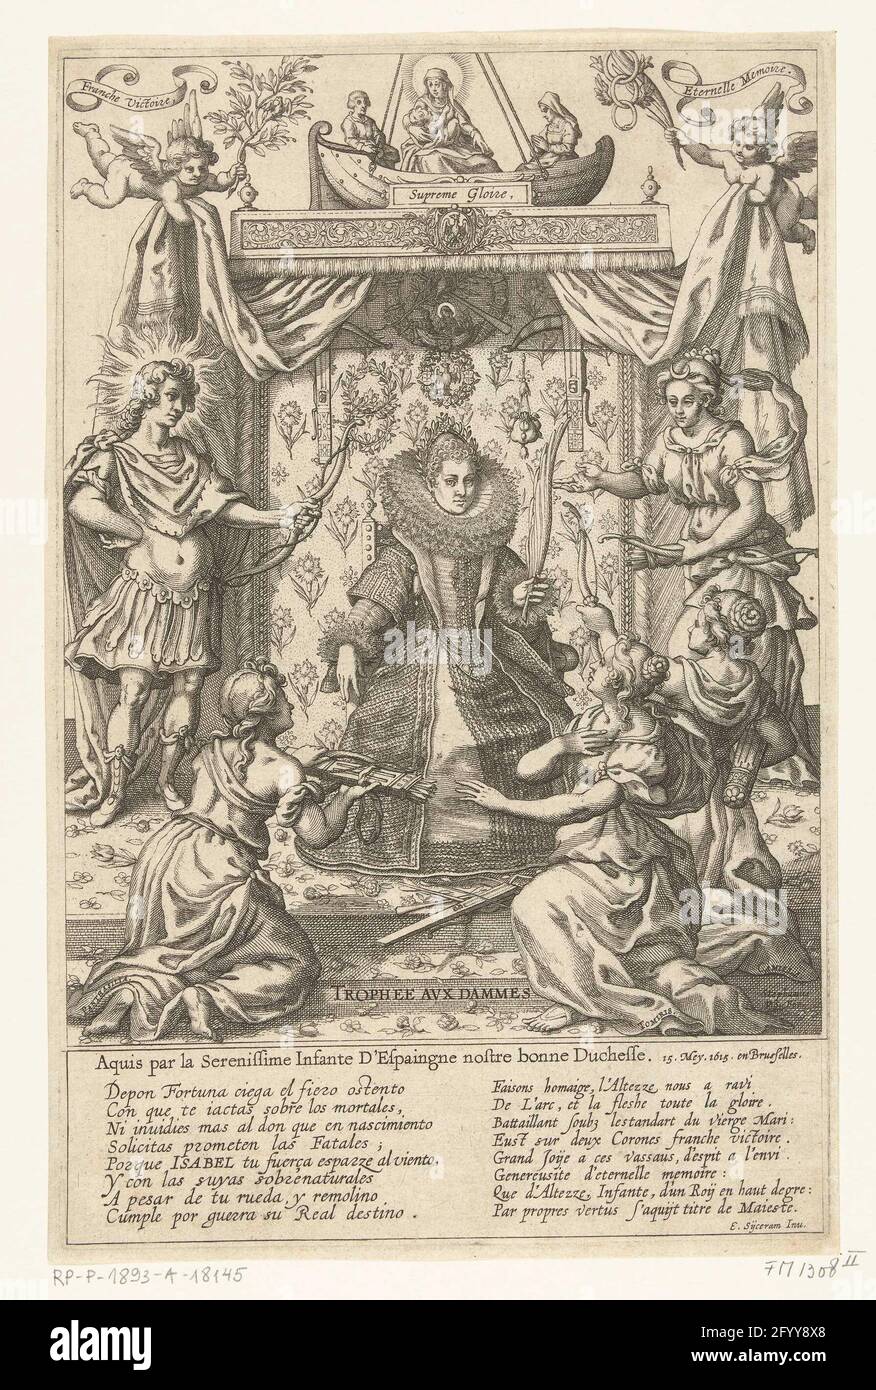 Allegory in honor of Isabella Clara Eugenia after shooting the parrot in  1615; Trophee AVX Dammes / Aquis Par La Serenissime Infante d'Espaigne  Nostre Bonne Dame. 15 MEY. 1615 and Brussels lesson.